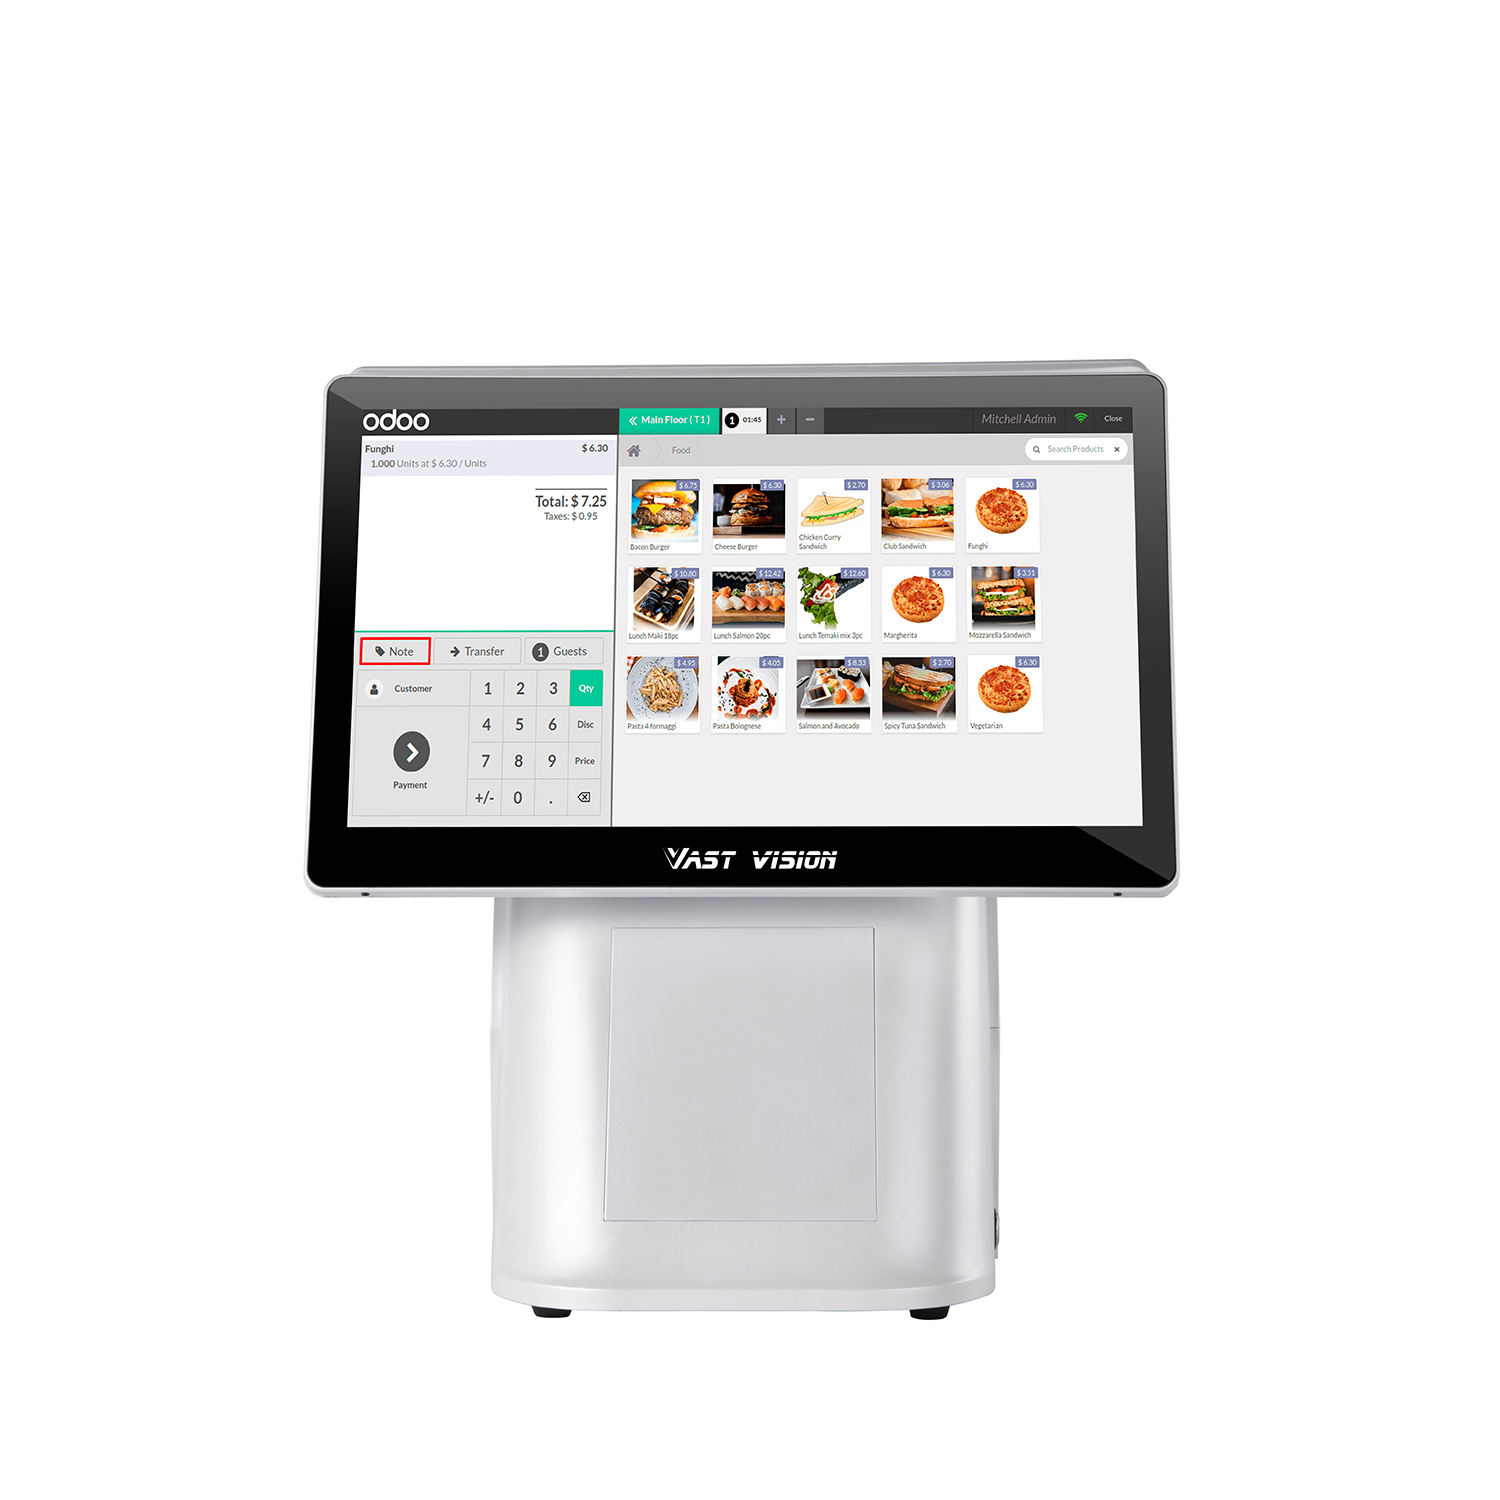 15.6 inch cash register and pos system